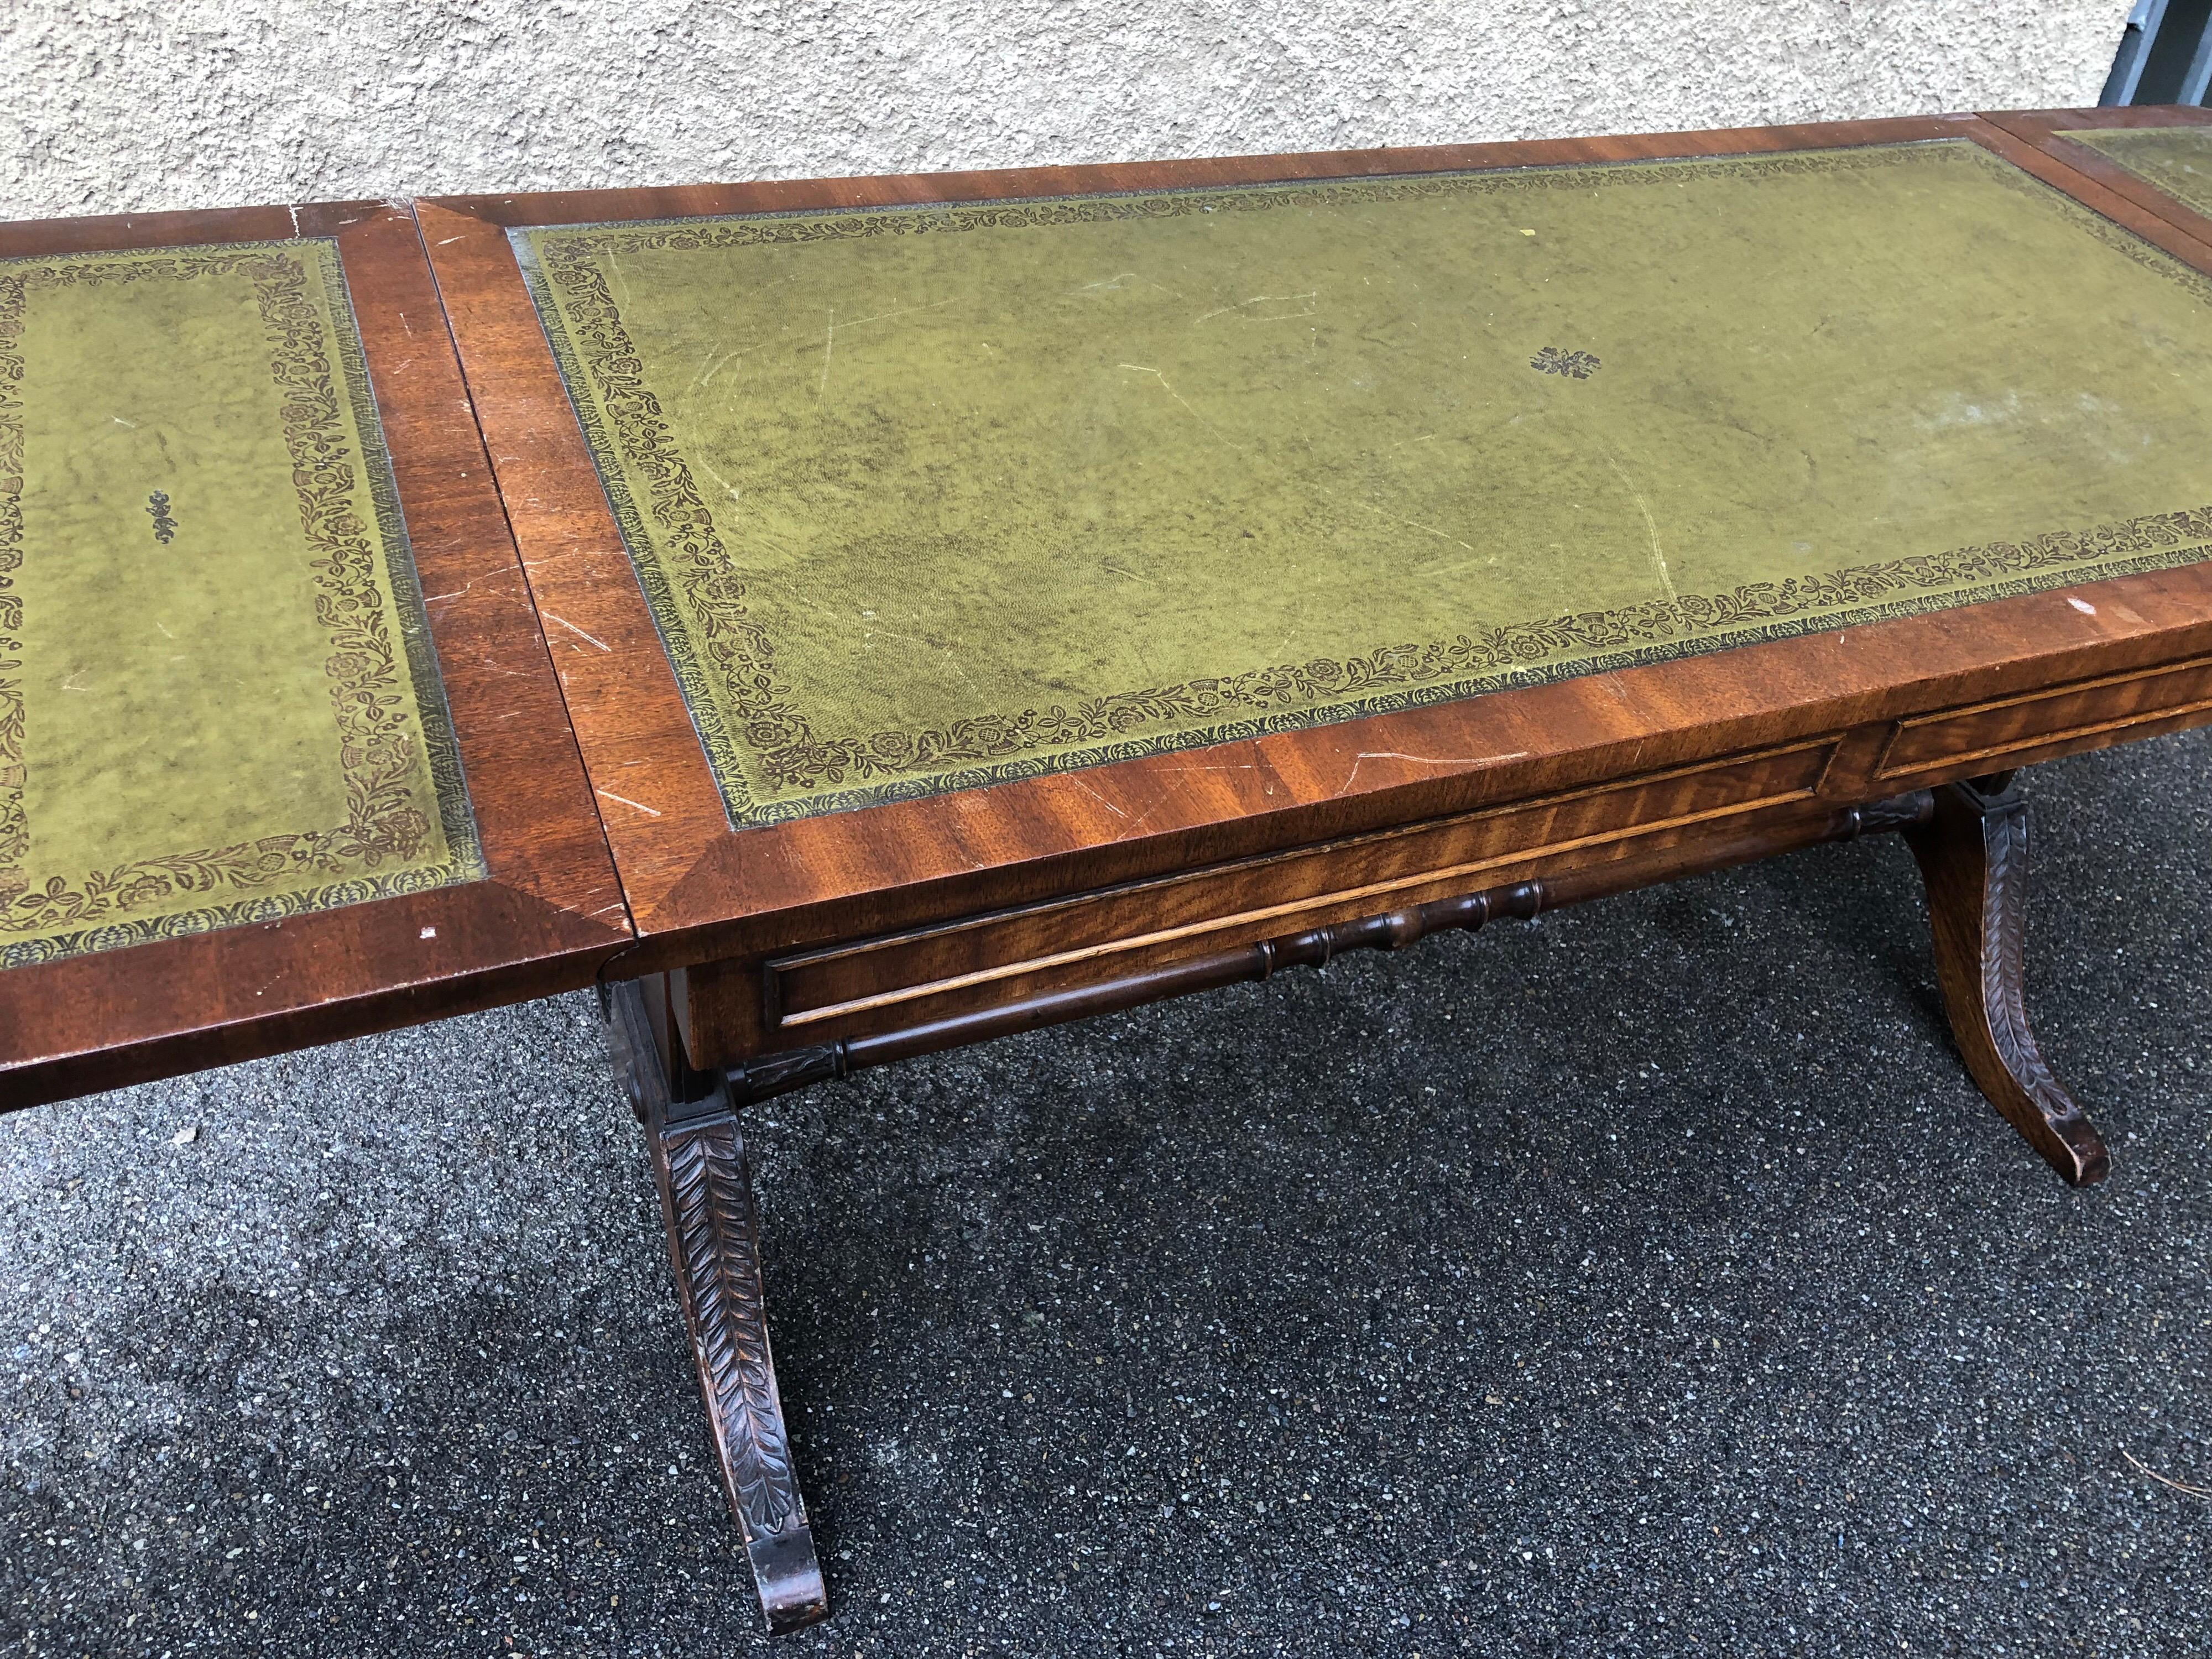 British Regency Wood Low Coffee Green Leather Foldable Table